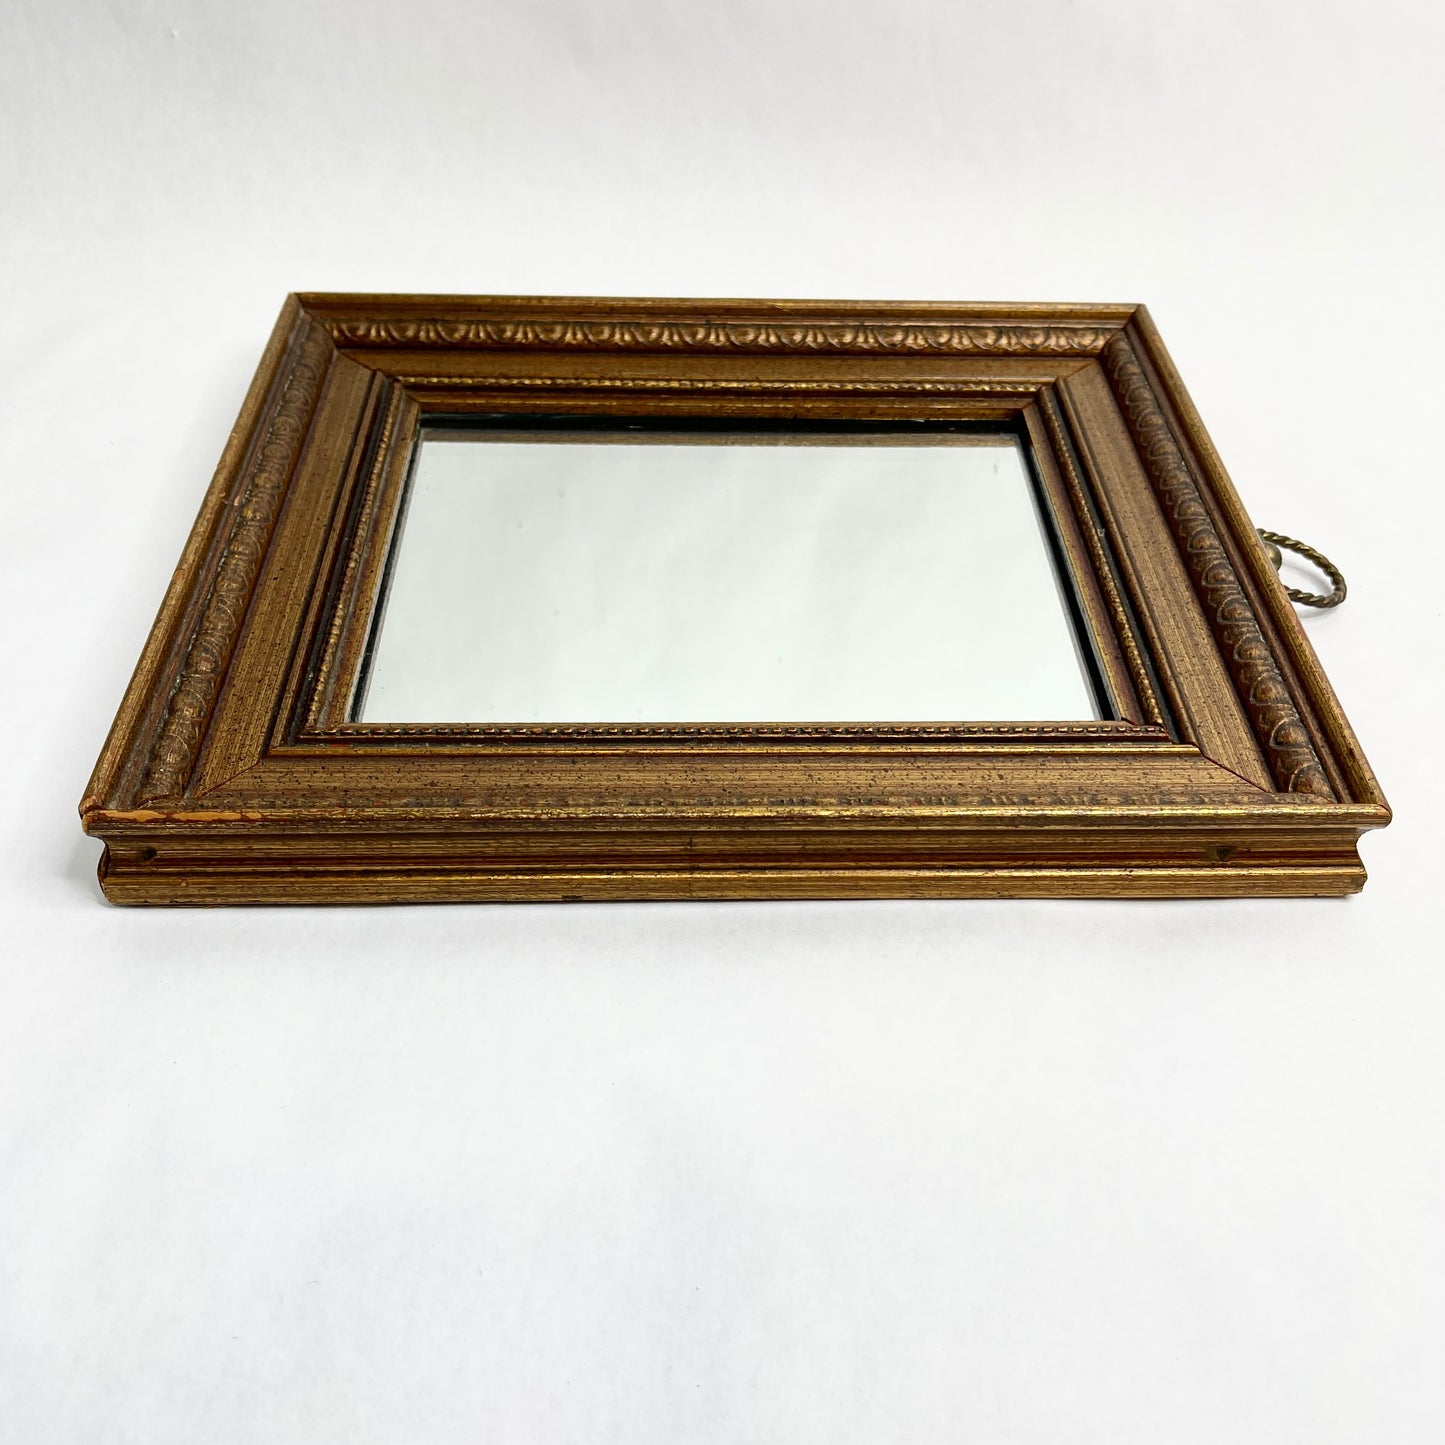 Vintage Decorative Wood Frame Bronze Color 9 x 10 Rectangle Wall Mirror